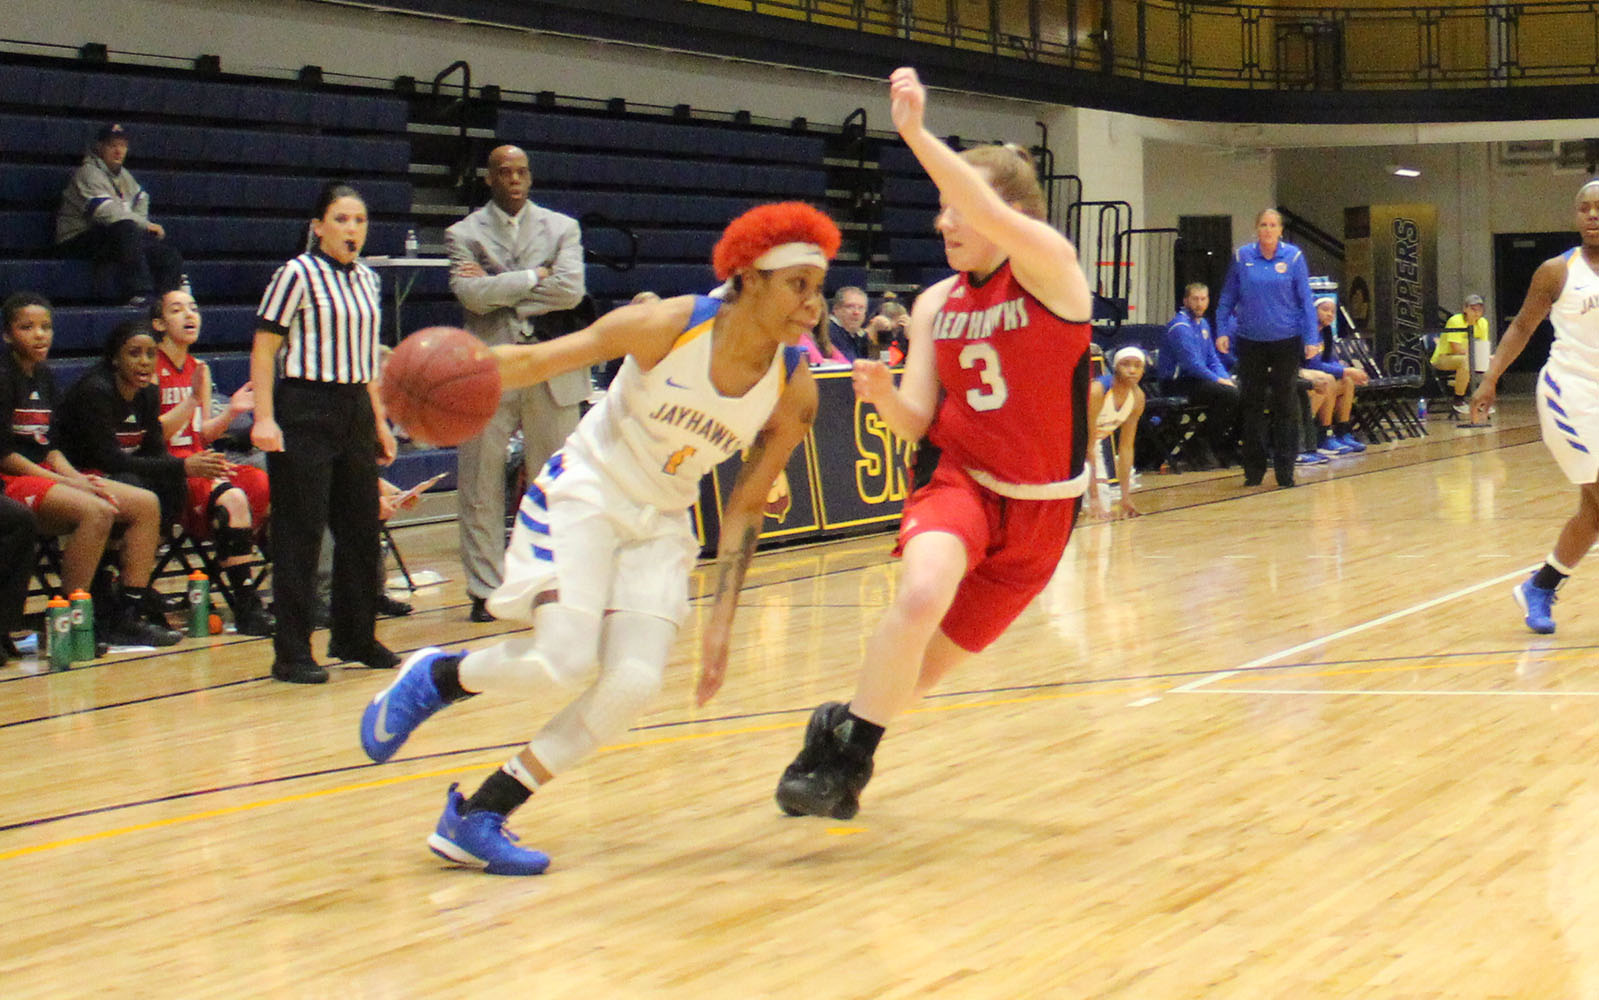 Muskegon CC women's basketball player drives to the hoop against Lake Michigan College